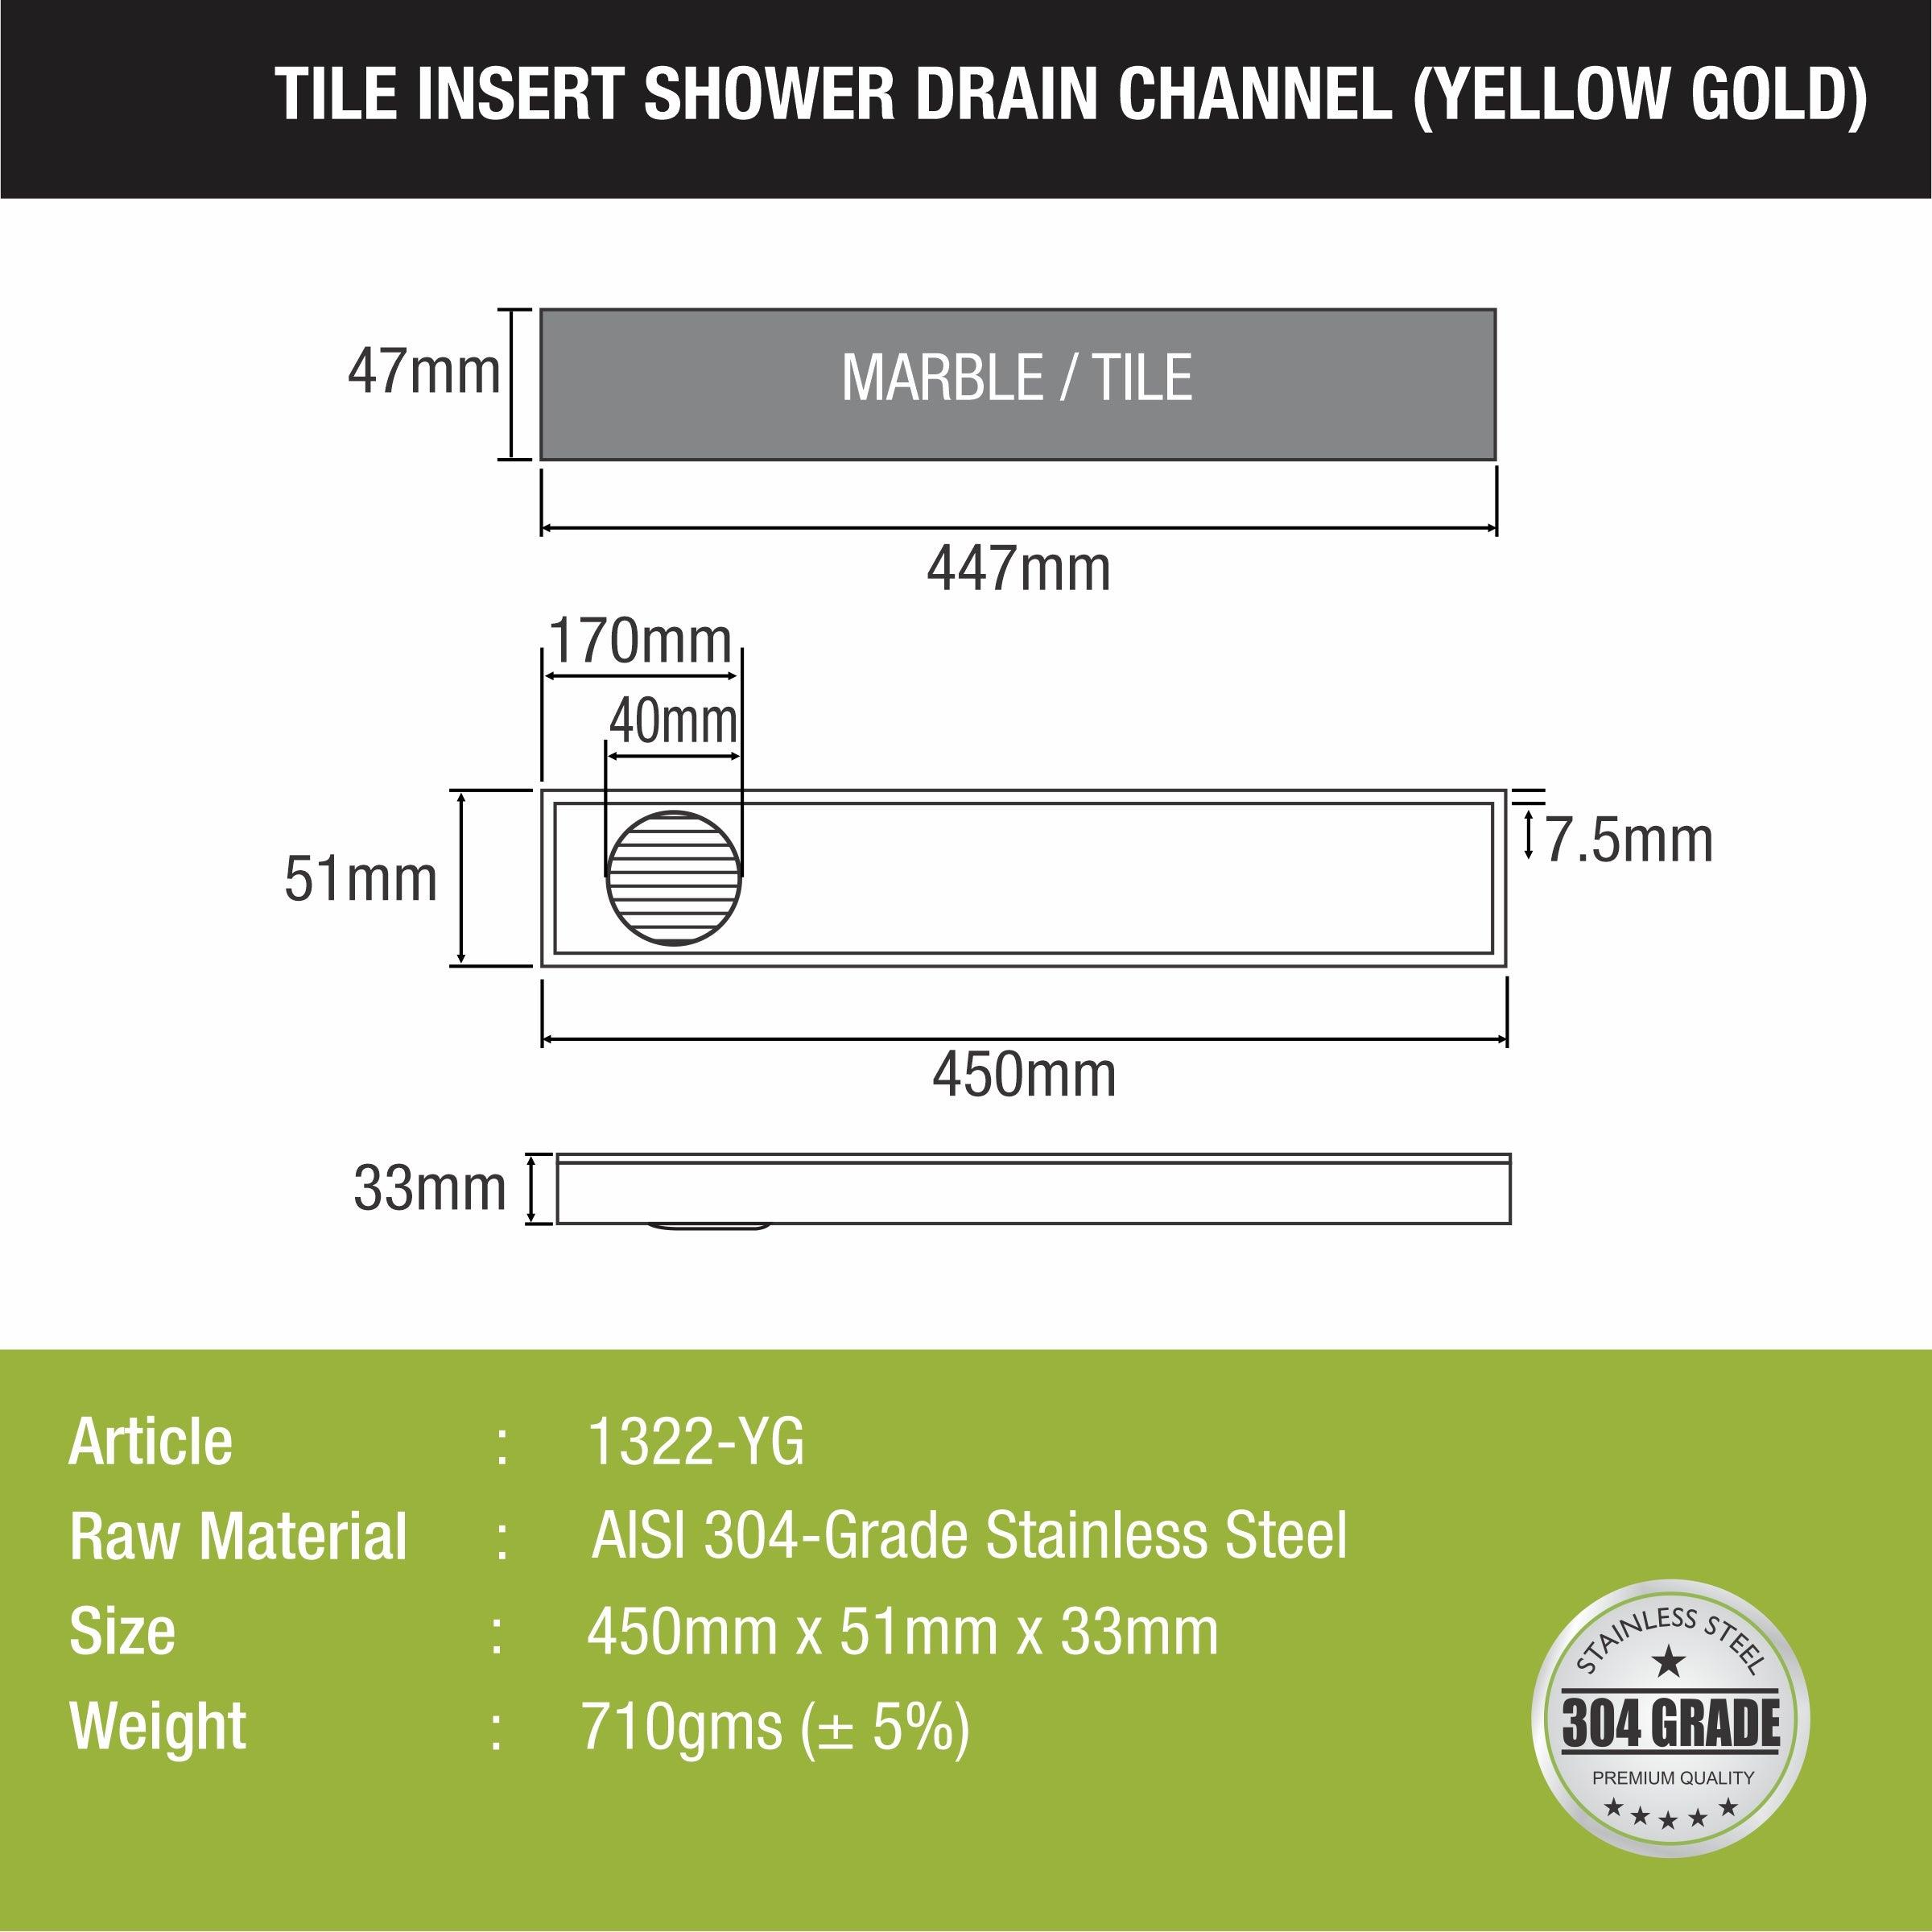 Tile Insert Shower Drain Channel - Yellow Gold (18 x 2 Inches) sizes and dimensions